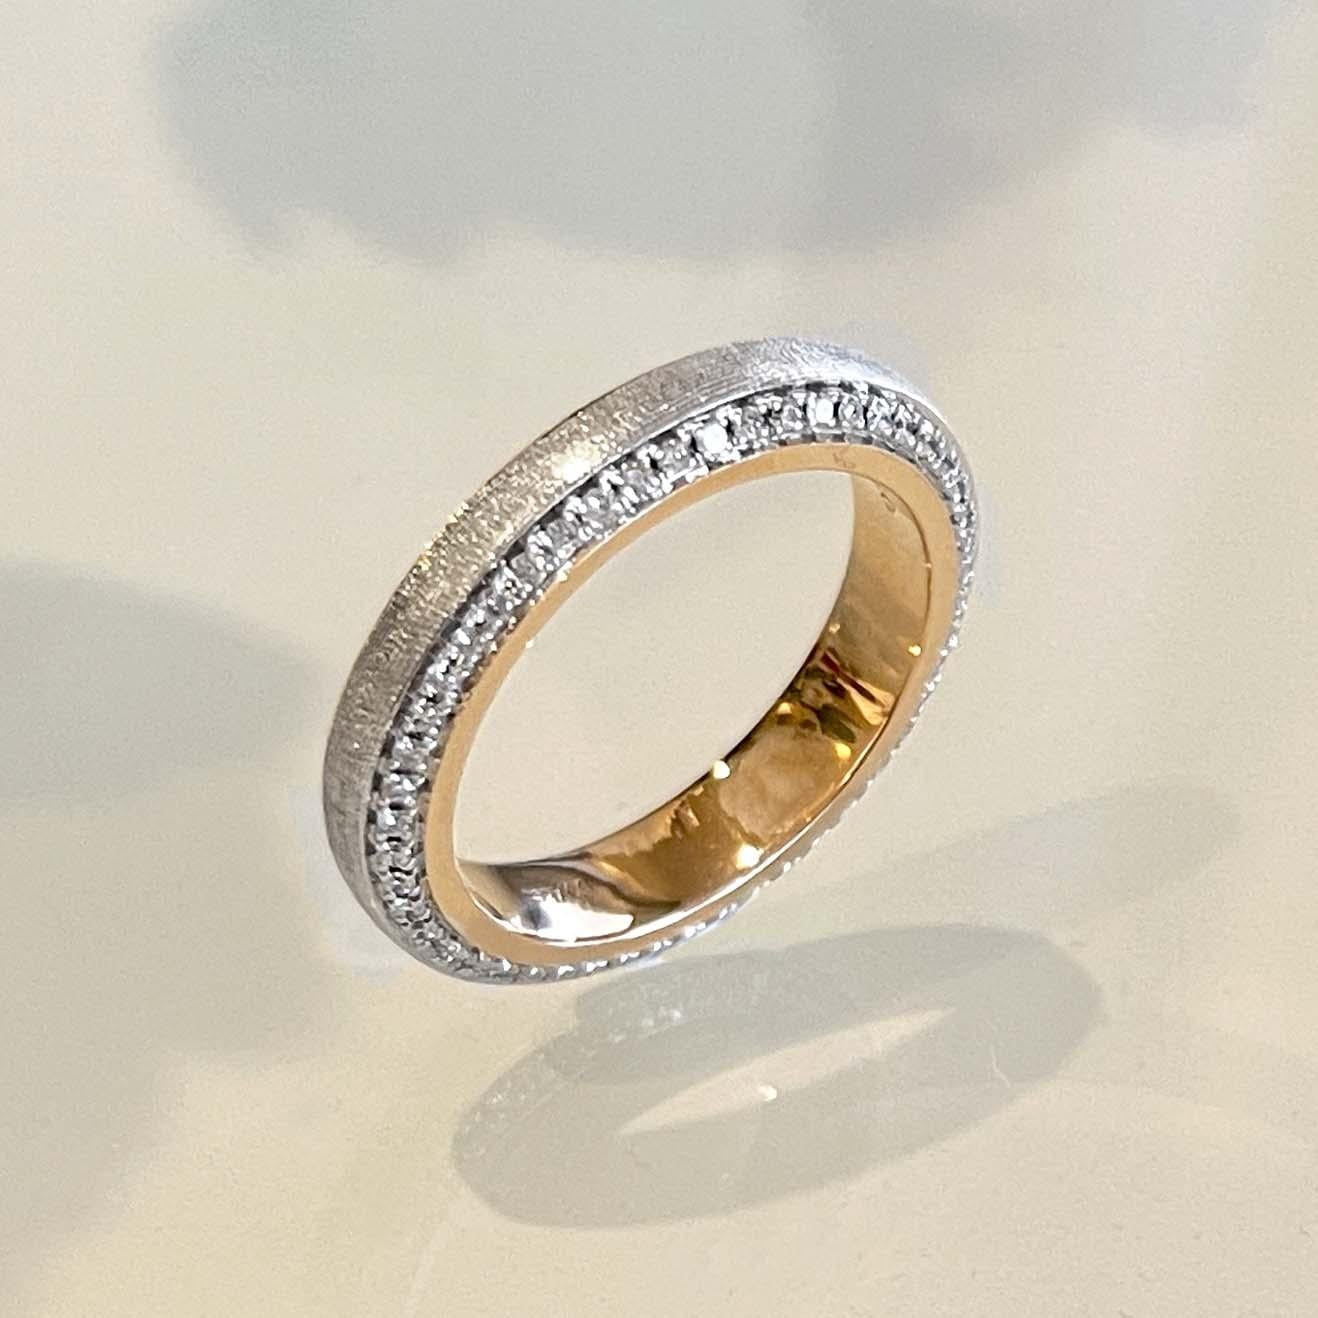 Produced by award winning Italian designer Stefano Vitolo. Stefano creates custom artisanal one of a kind jewelry with excellent gemstones in a truly old world Italian craftmanship.
This handcrafted ring has 0.46 total carat weight of F/G color and